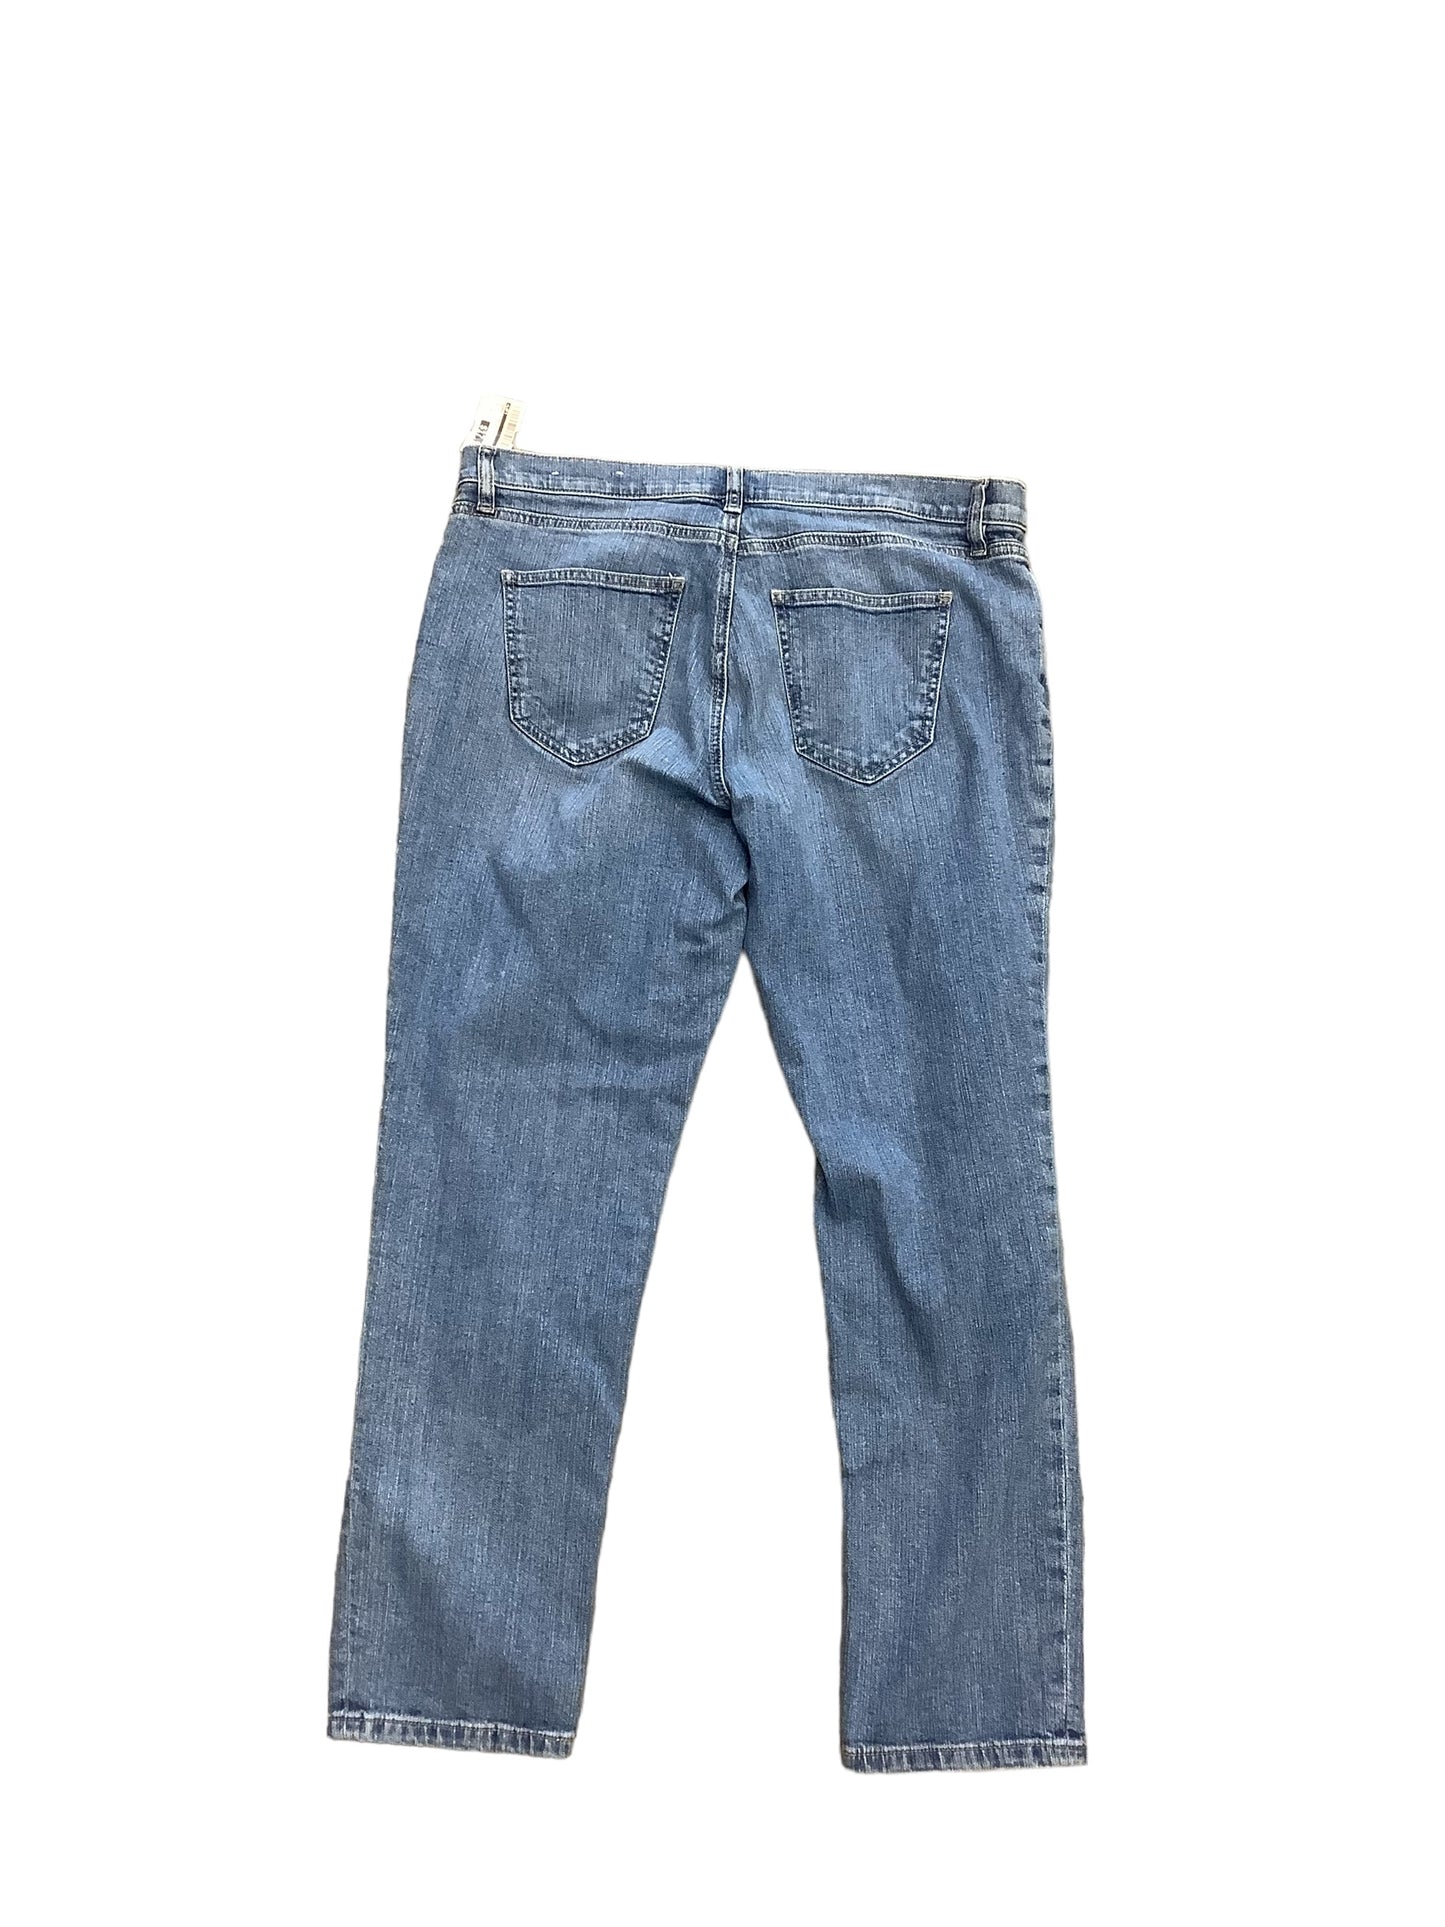 Jeans Straight By Loft  Size: 10